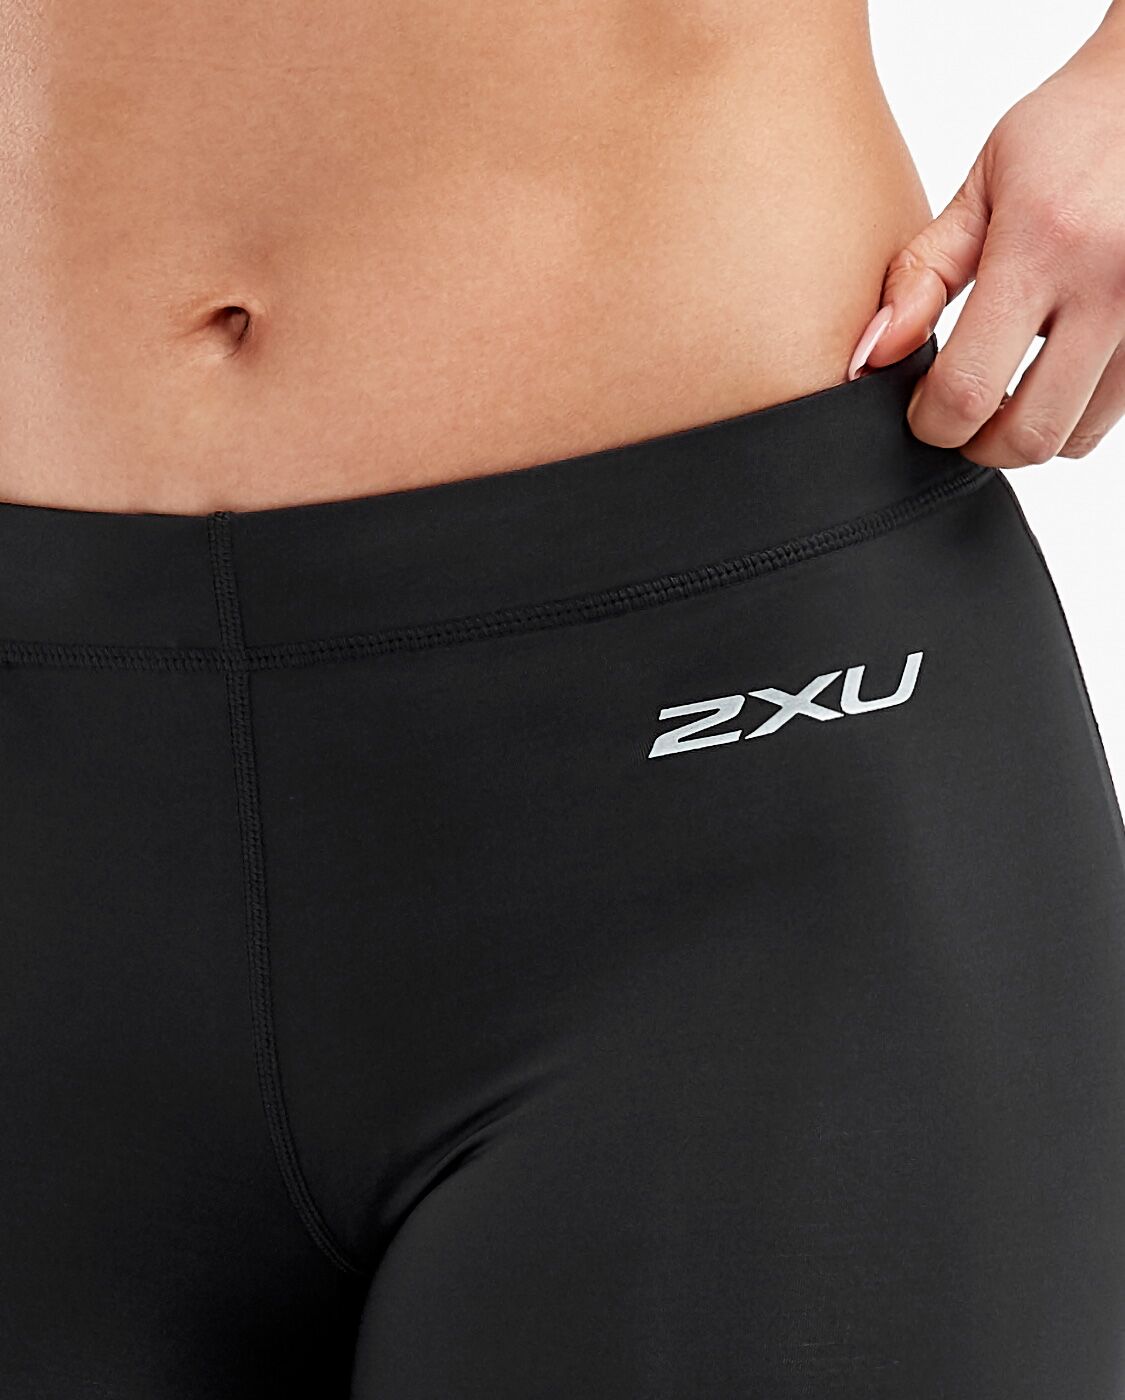 2XU South Africa - Womens Core Compression 5 Inch Game Day Shorts - Black/Silver